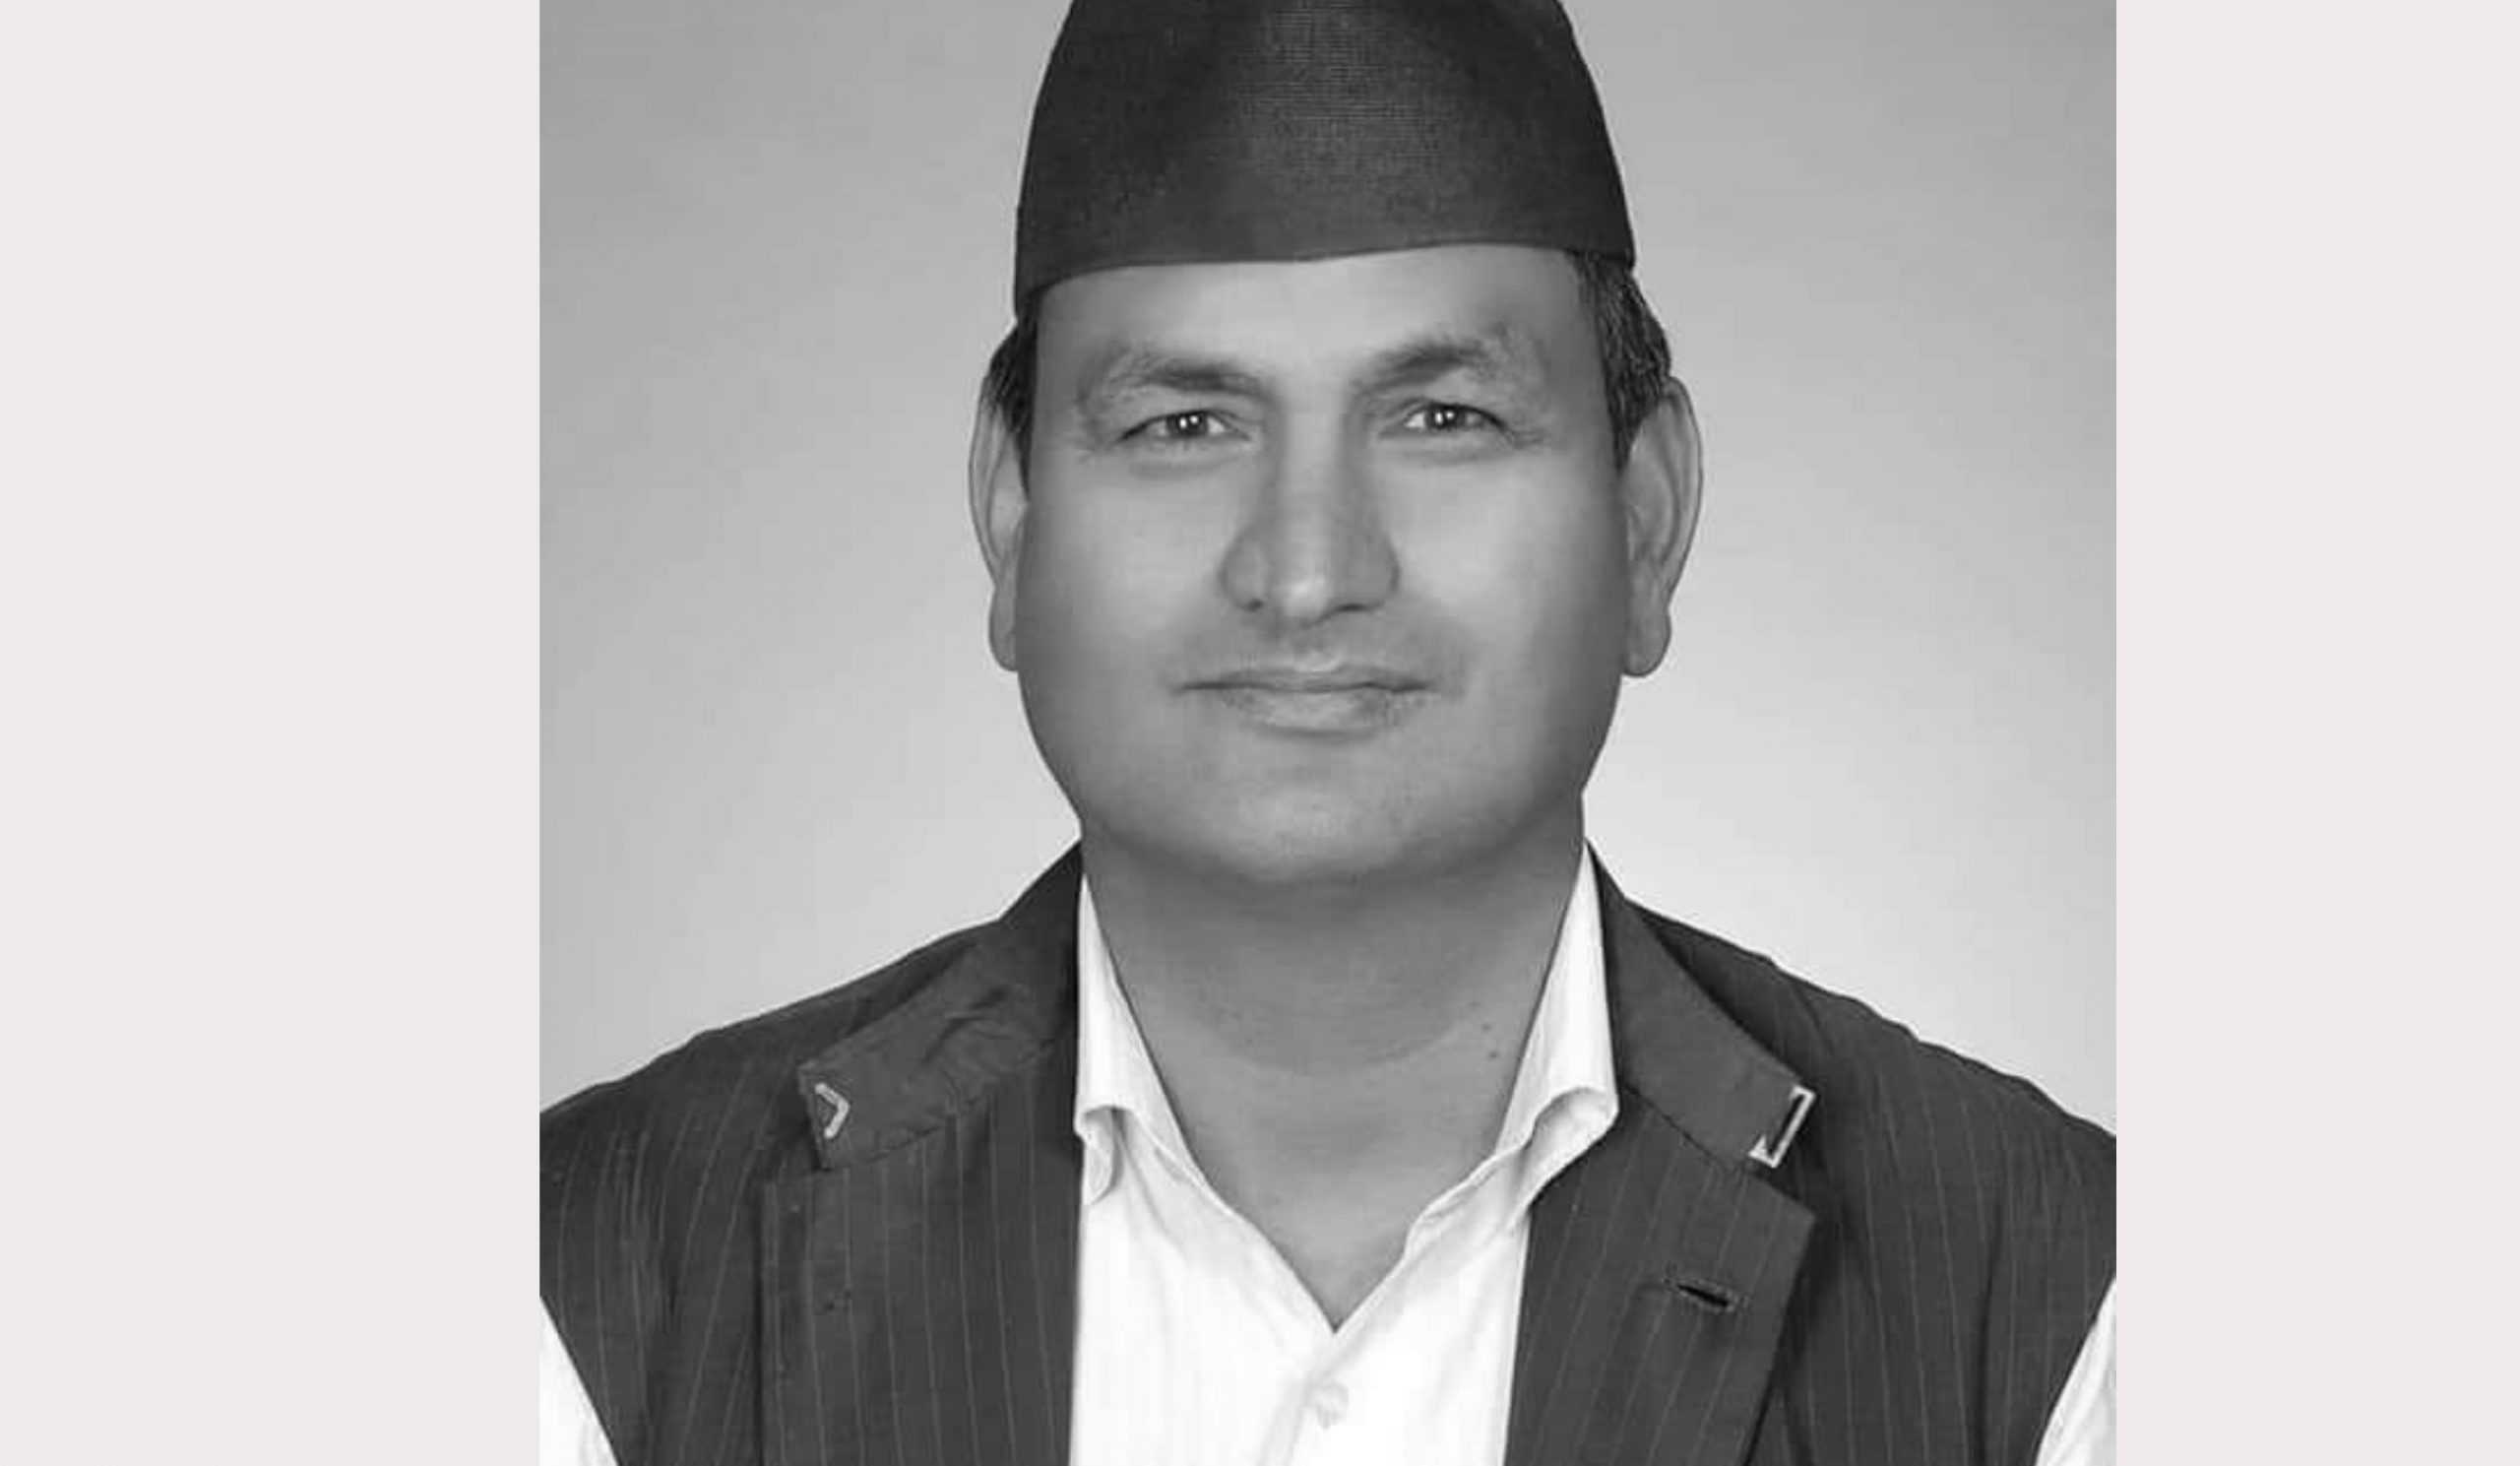 Former Minister of State for Communications Bista dies due to Covid